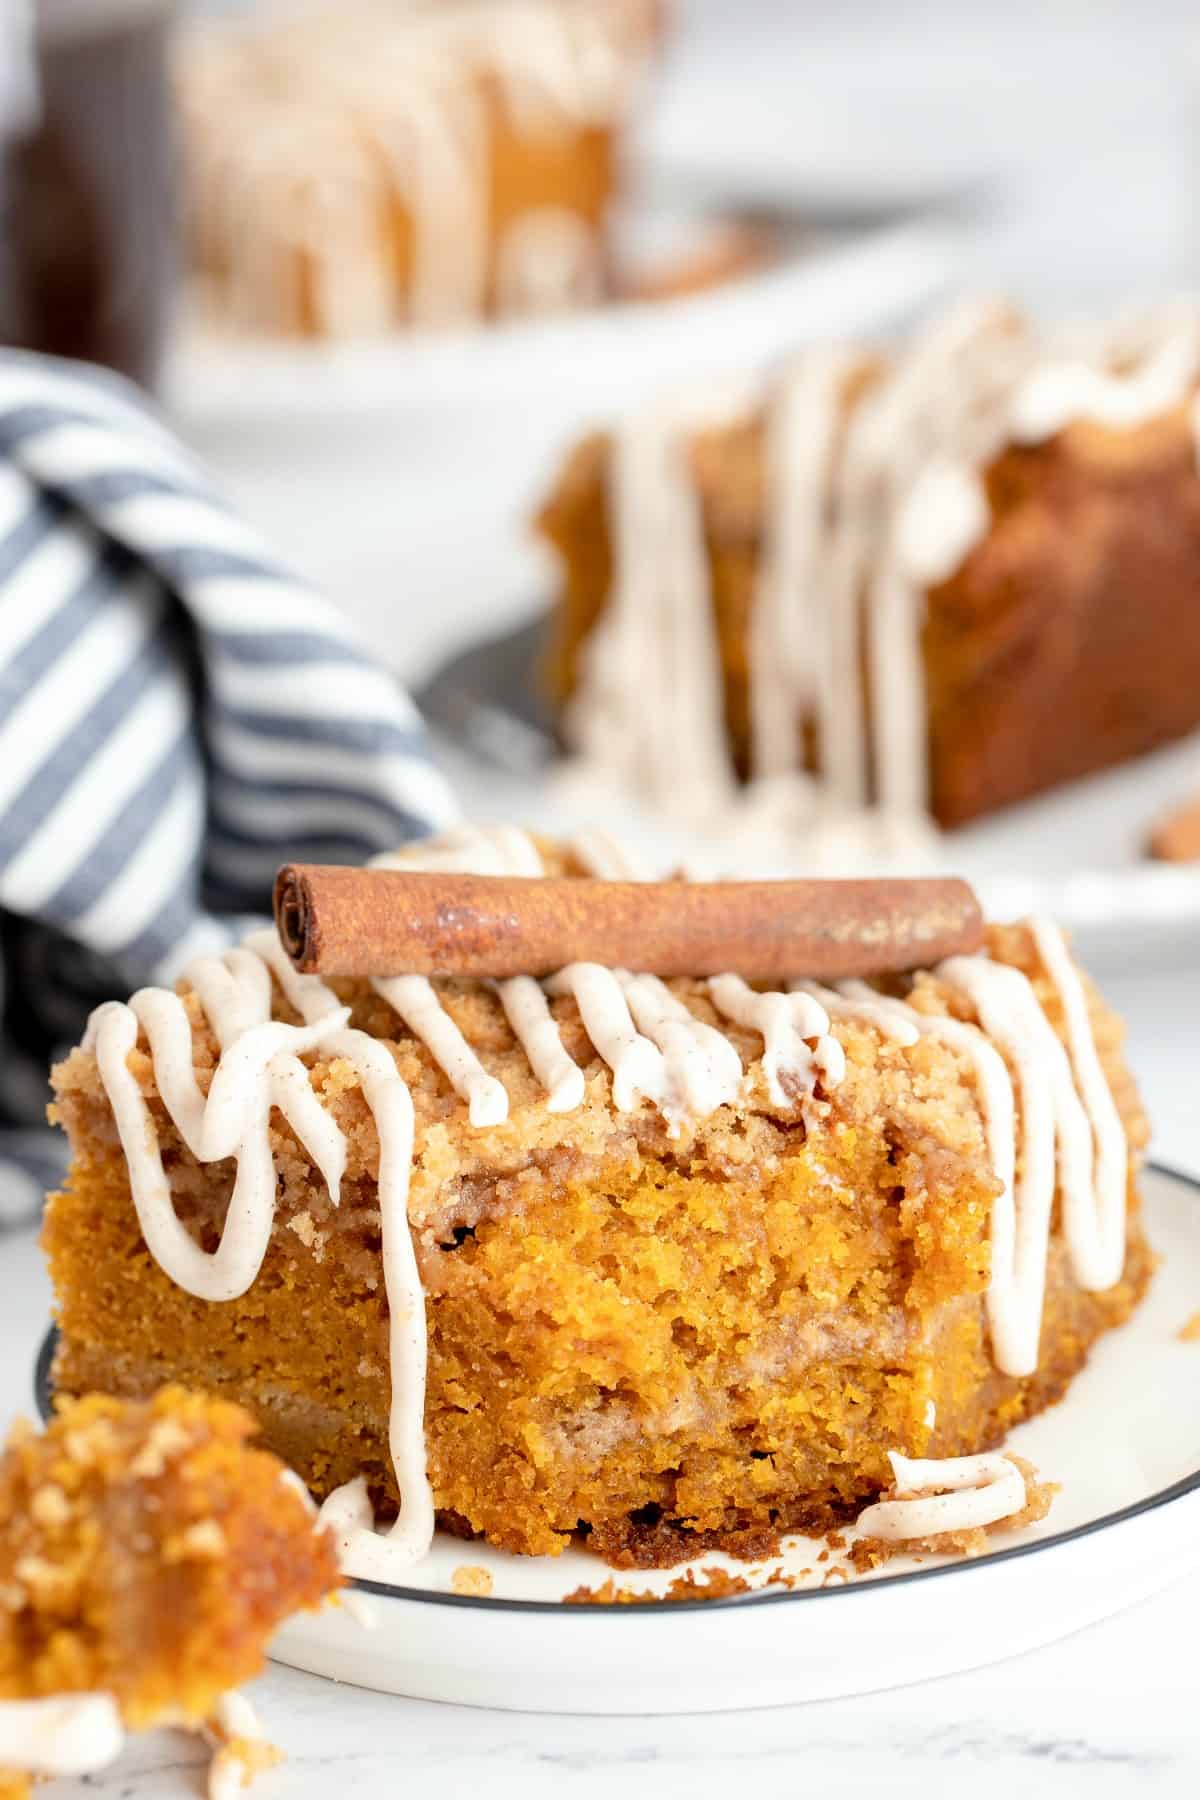 Pumpkin crumb cake with bite removed. Topped with cinnamon stick.